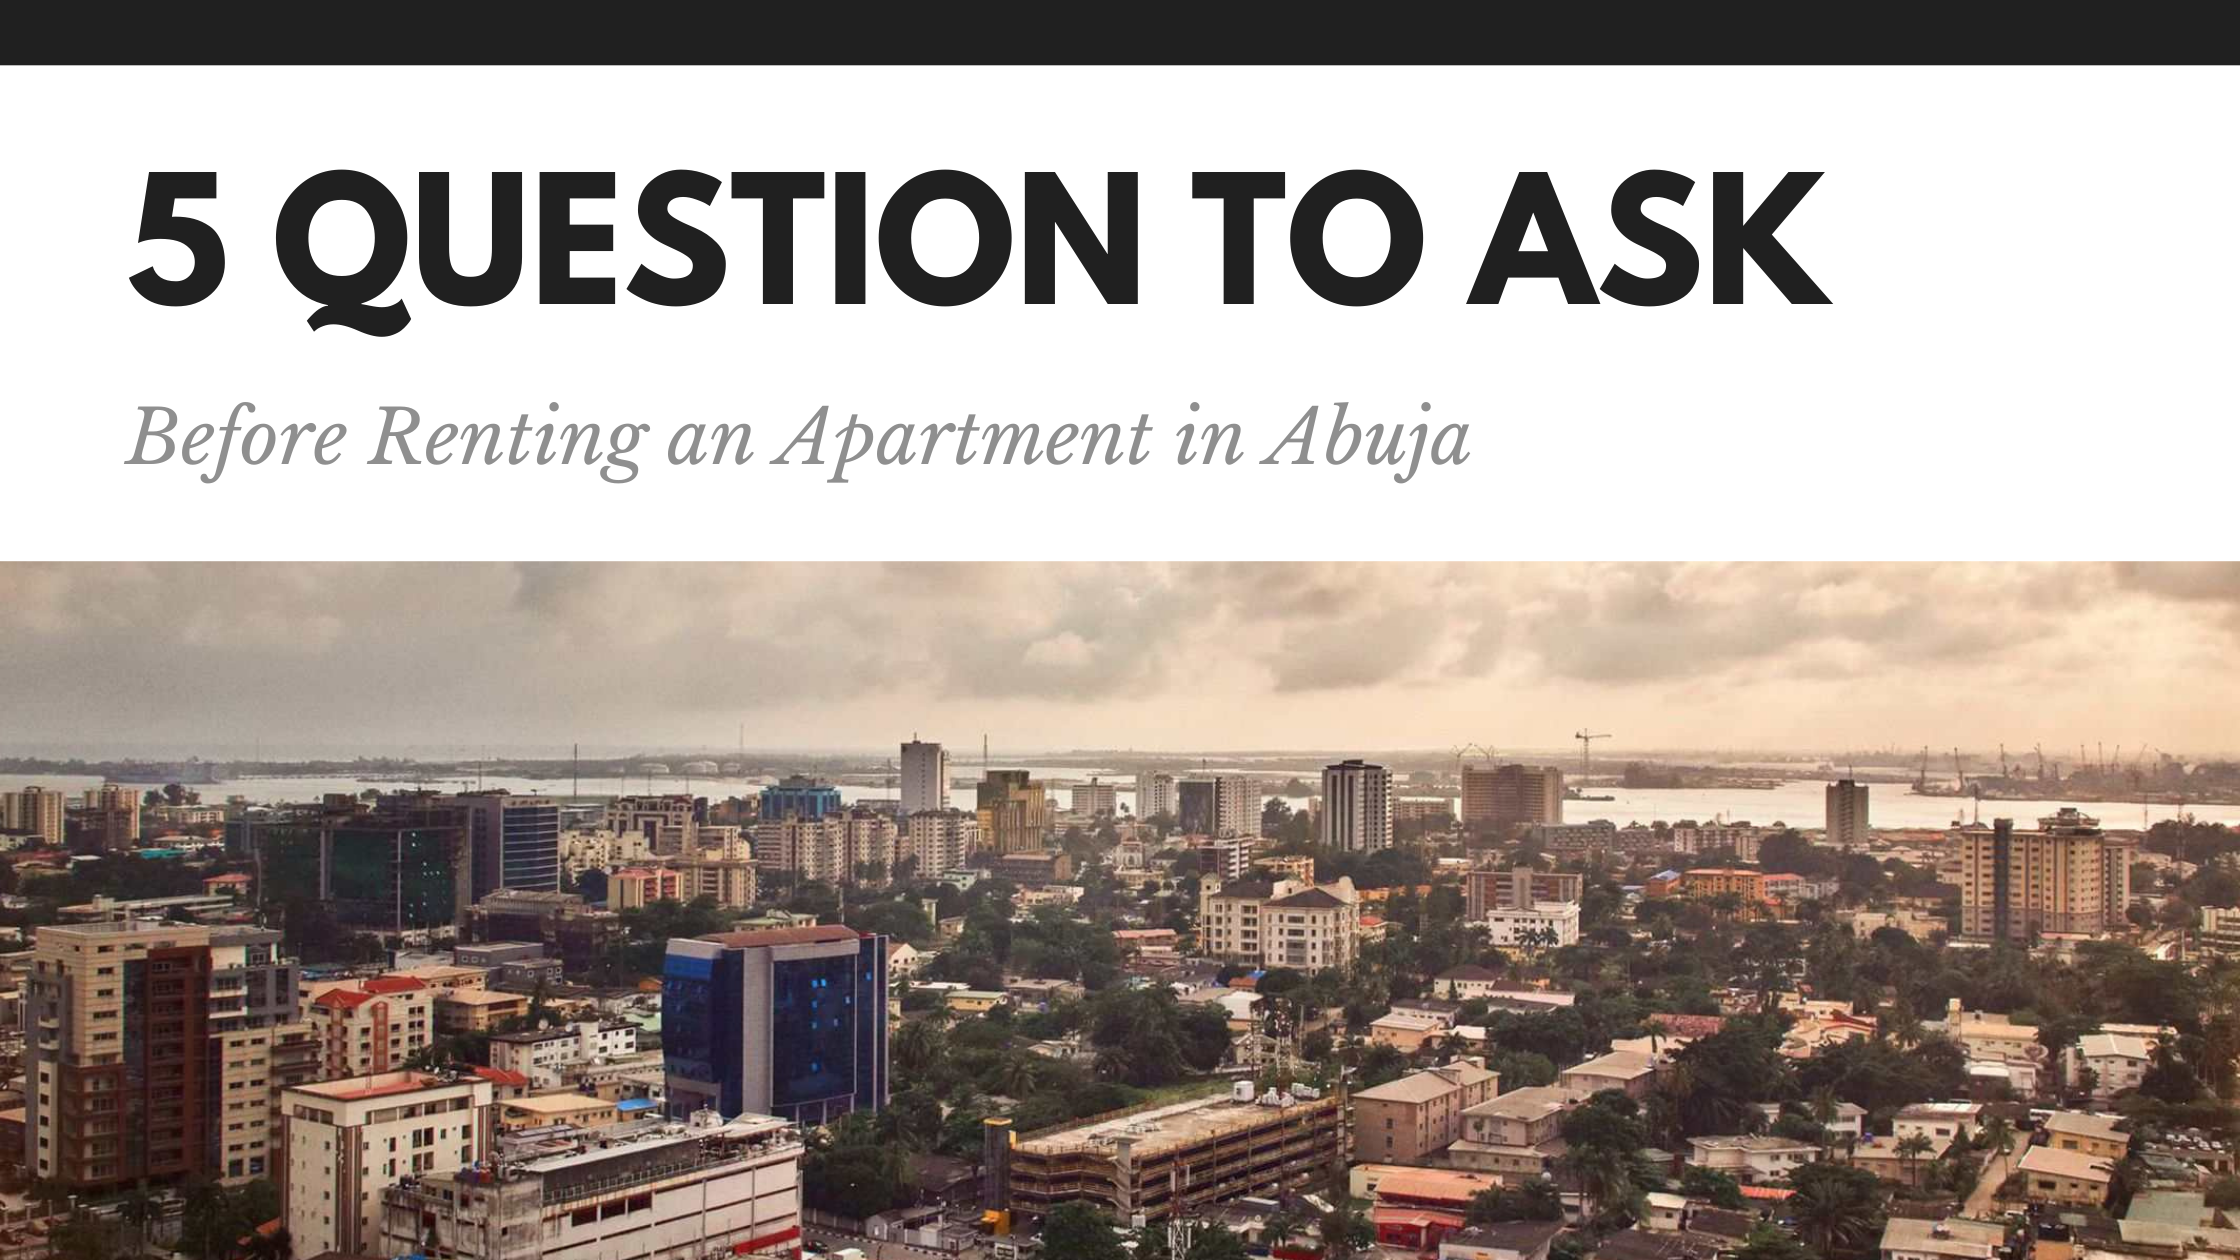 5 Questions To Ask Before Renting an Apartment in Abuja